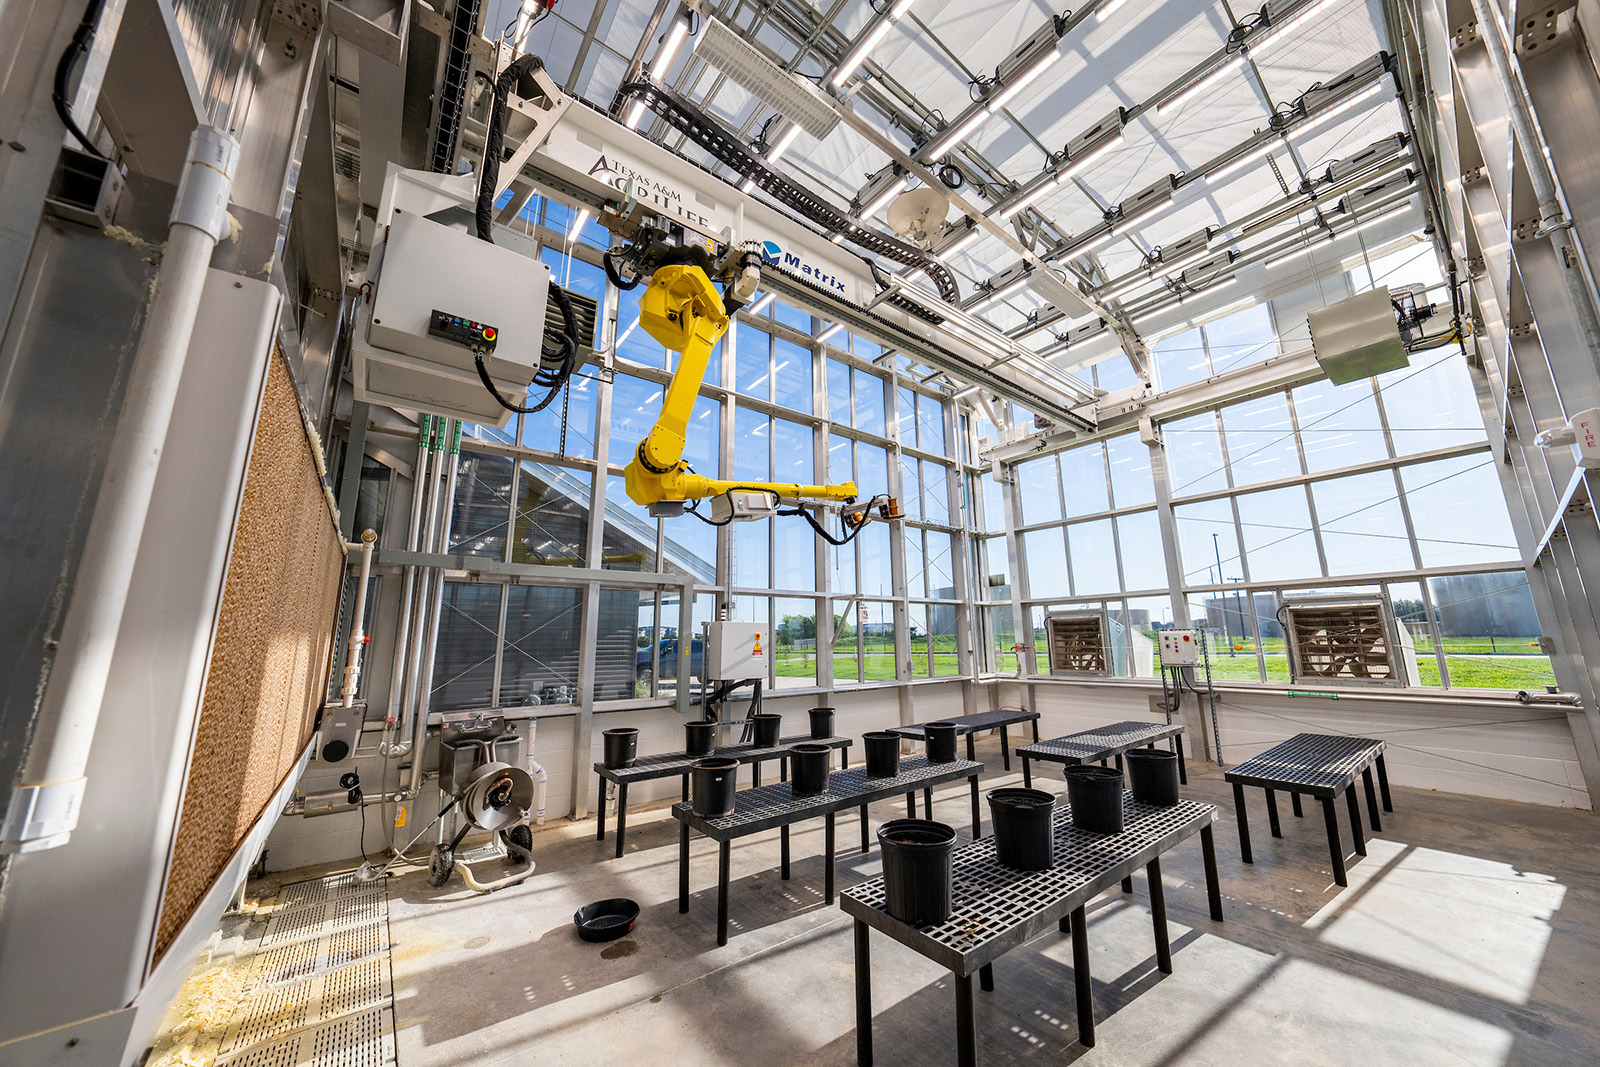 Wide shot of glass greenhouse interior with robot arm and track system attached to ceiling.